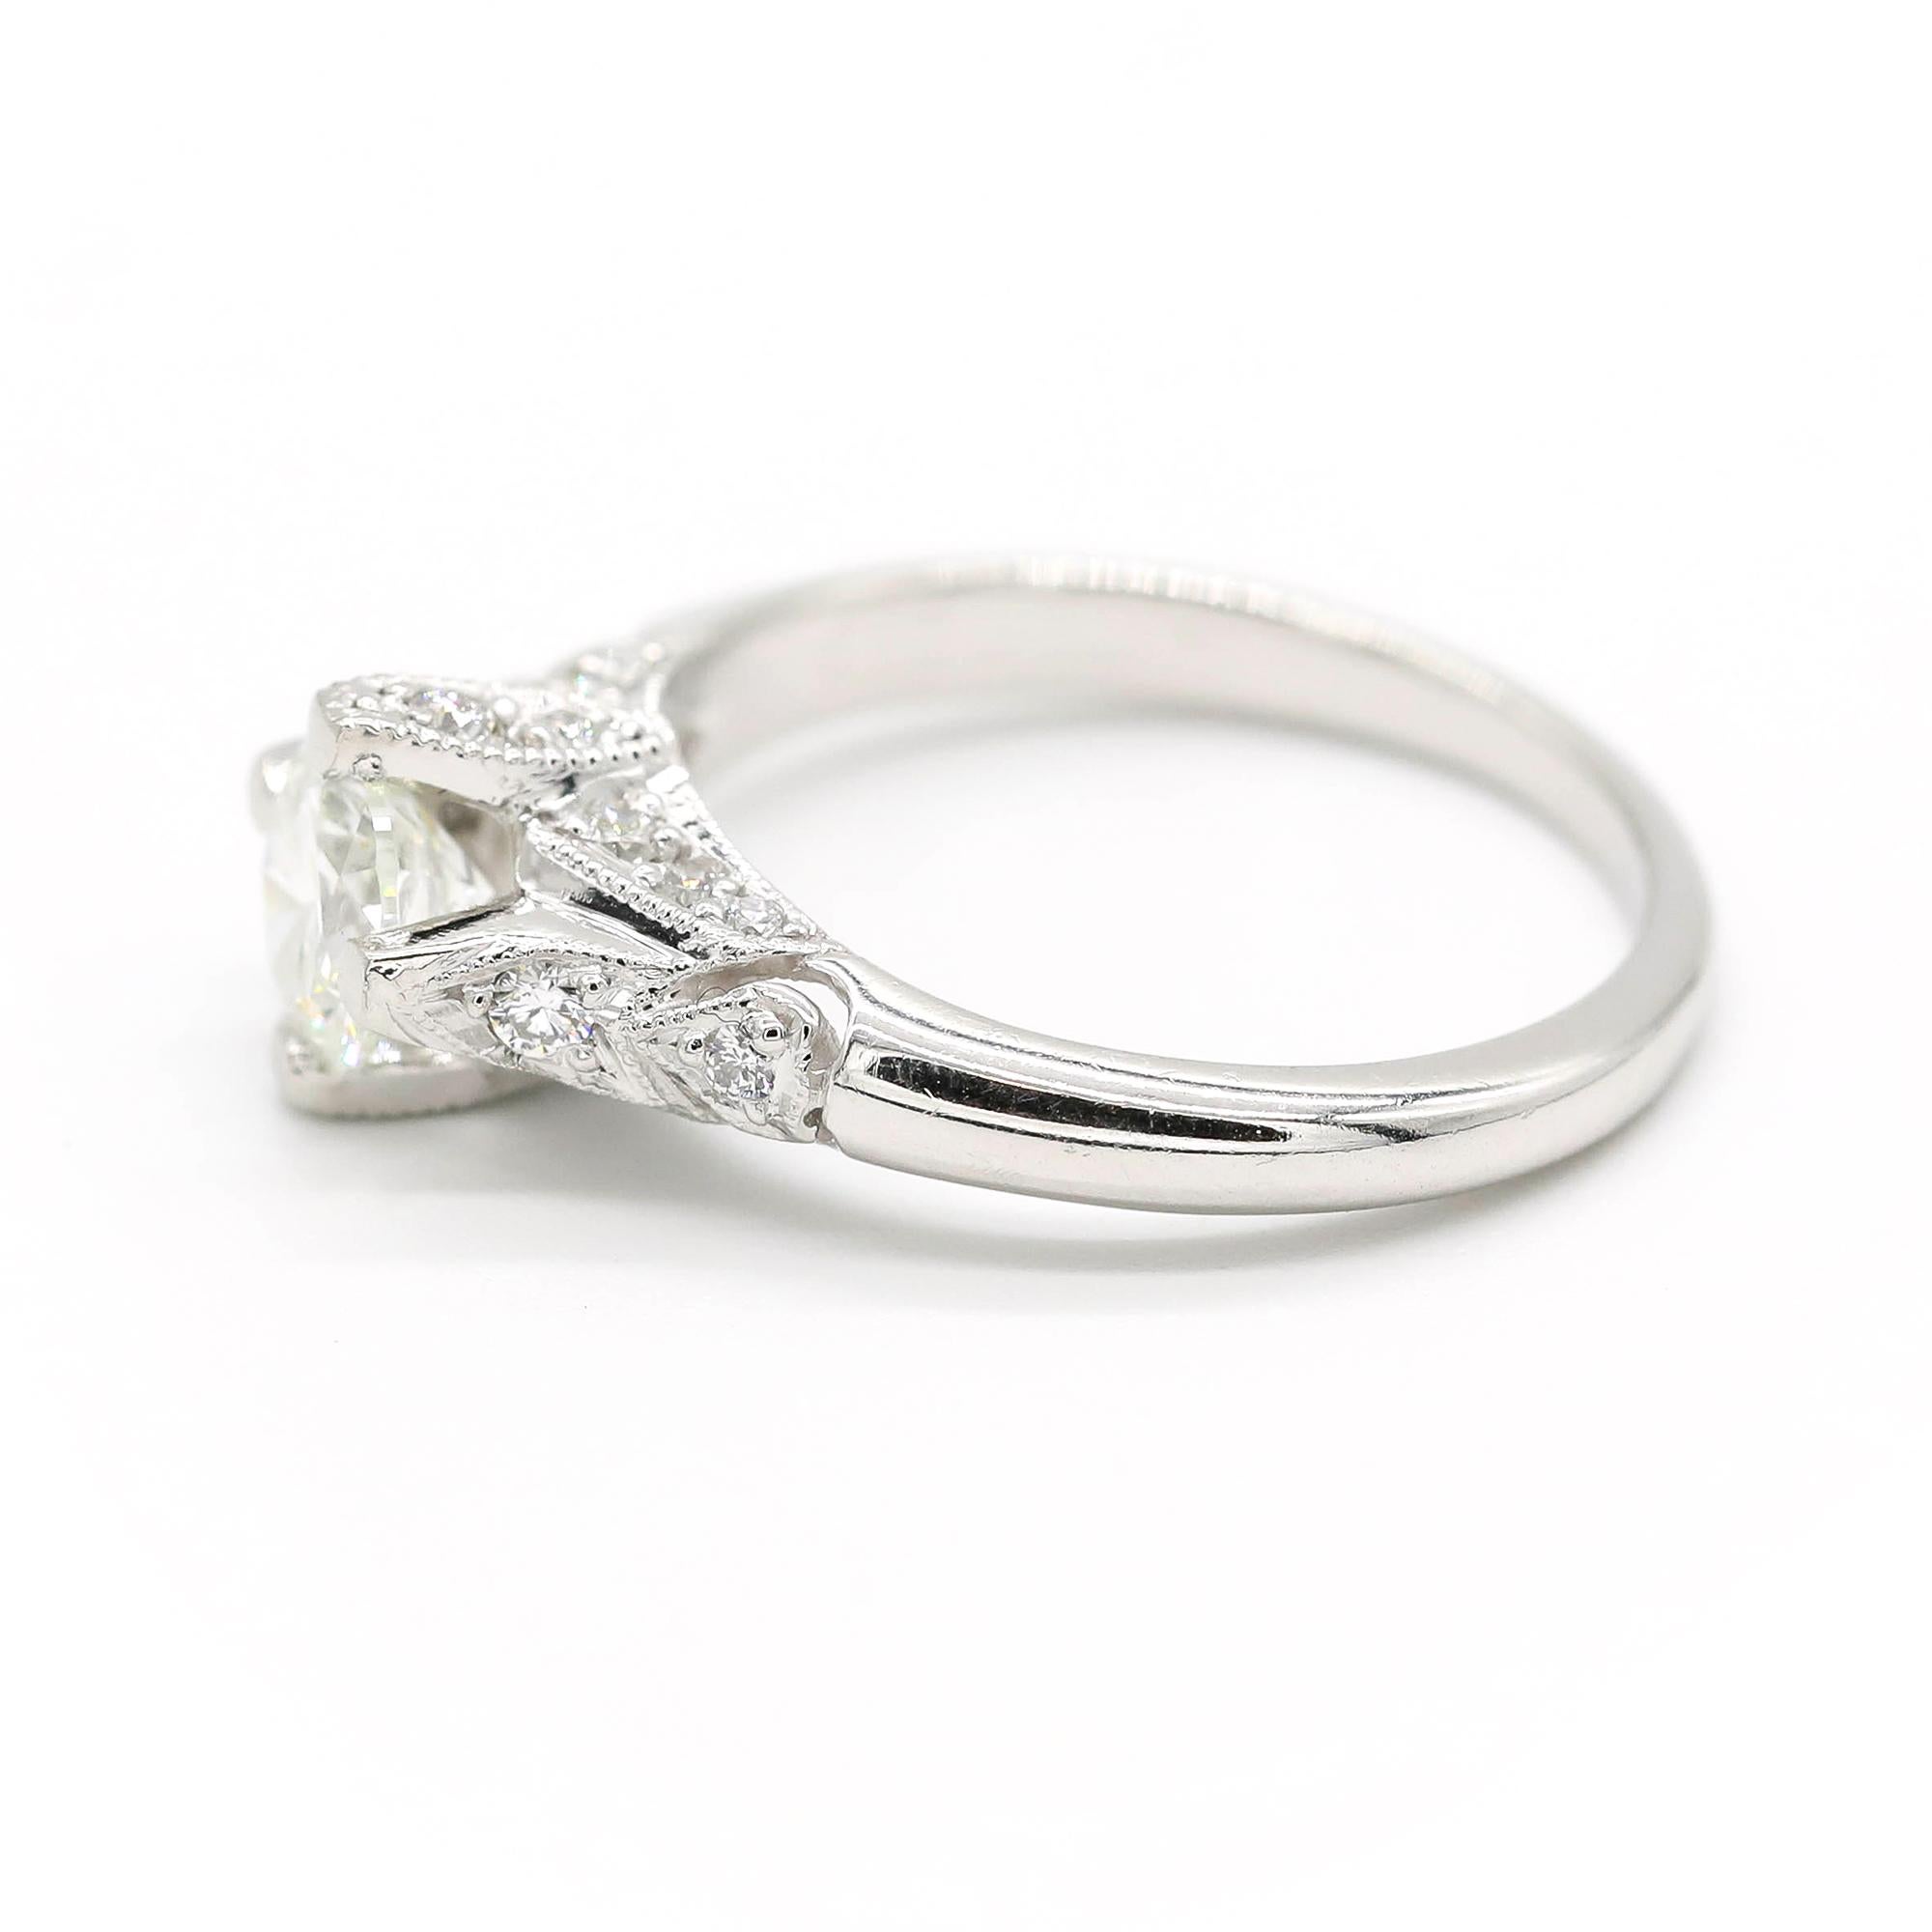 An impressive contemporary 1.0-carat diamond and platinum solitaire style engagement ring; part of our diverse diamond jewelry and estate jewelry collections.

This fine and the impressive diamond solitaire ring has been crafted in platinum.

The